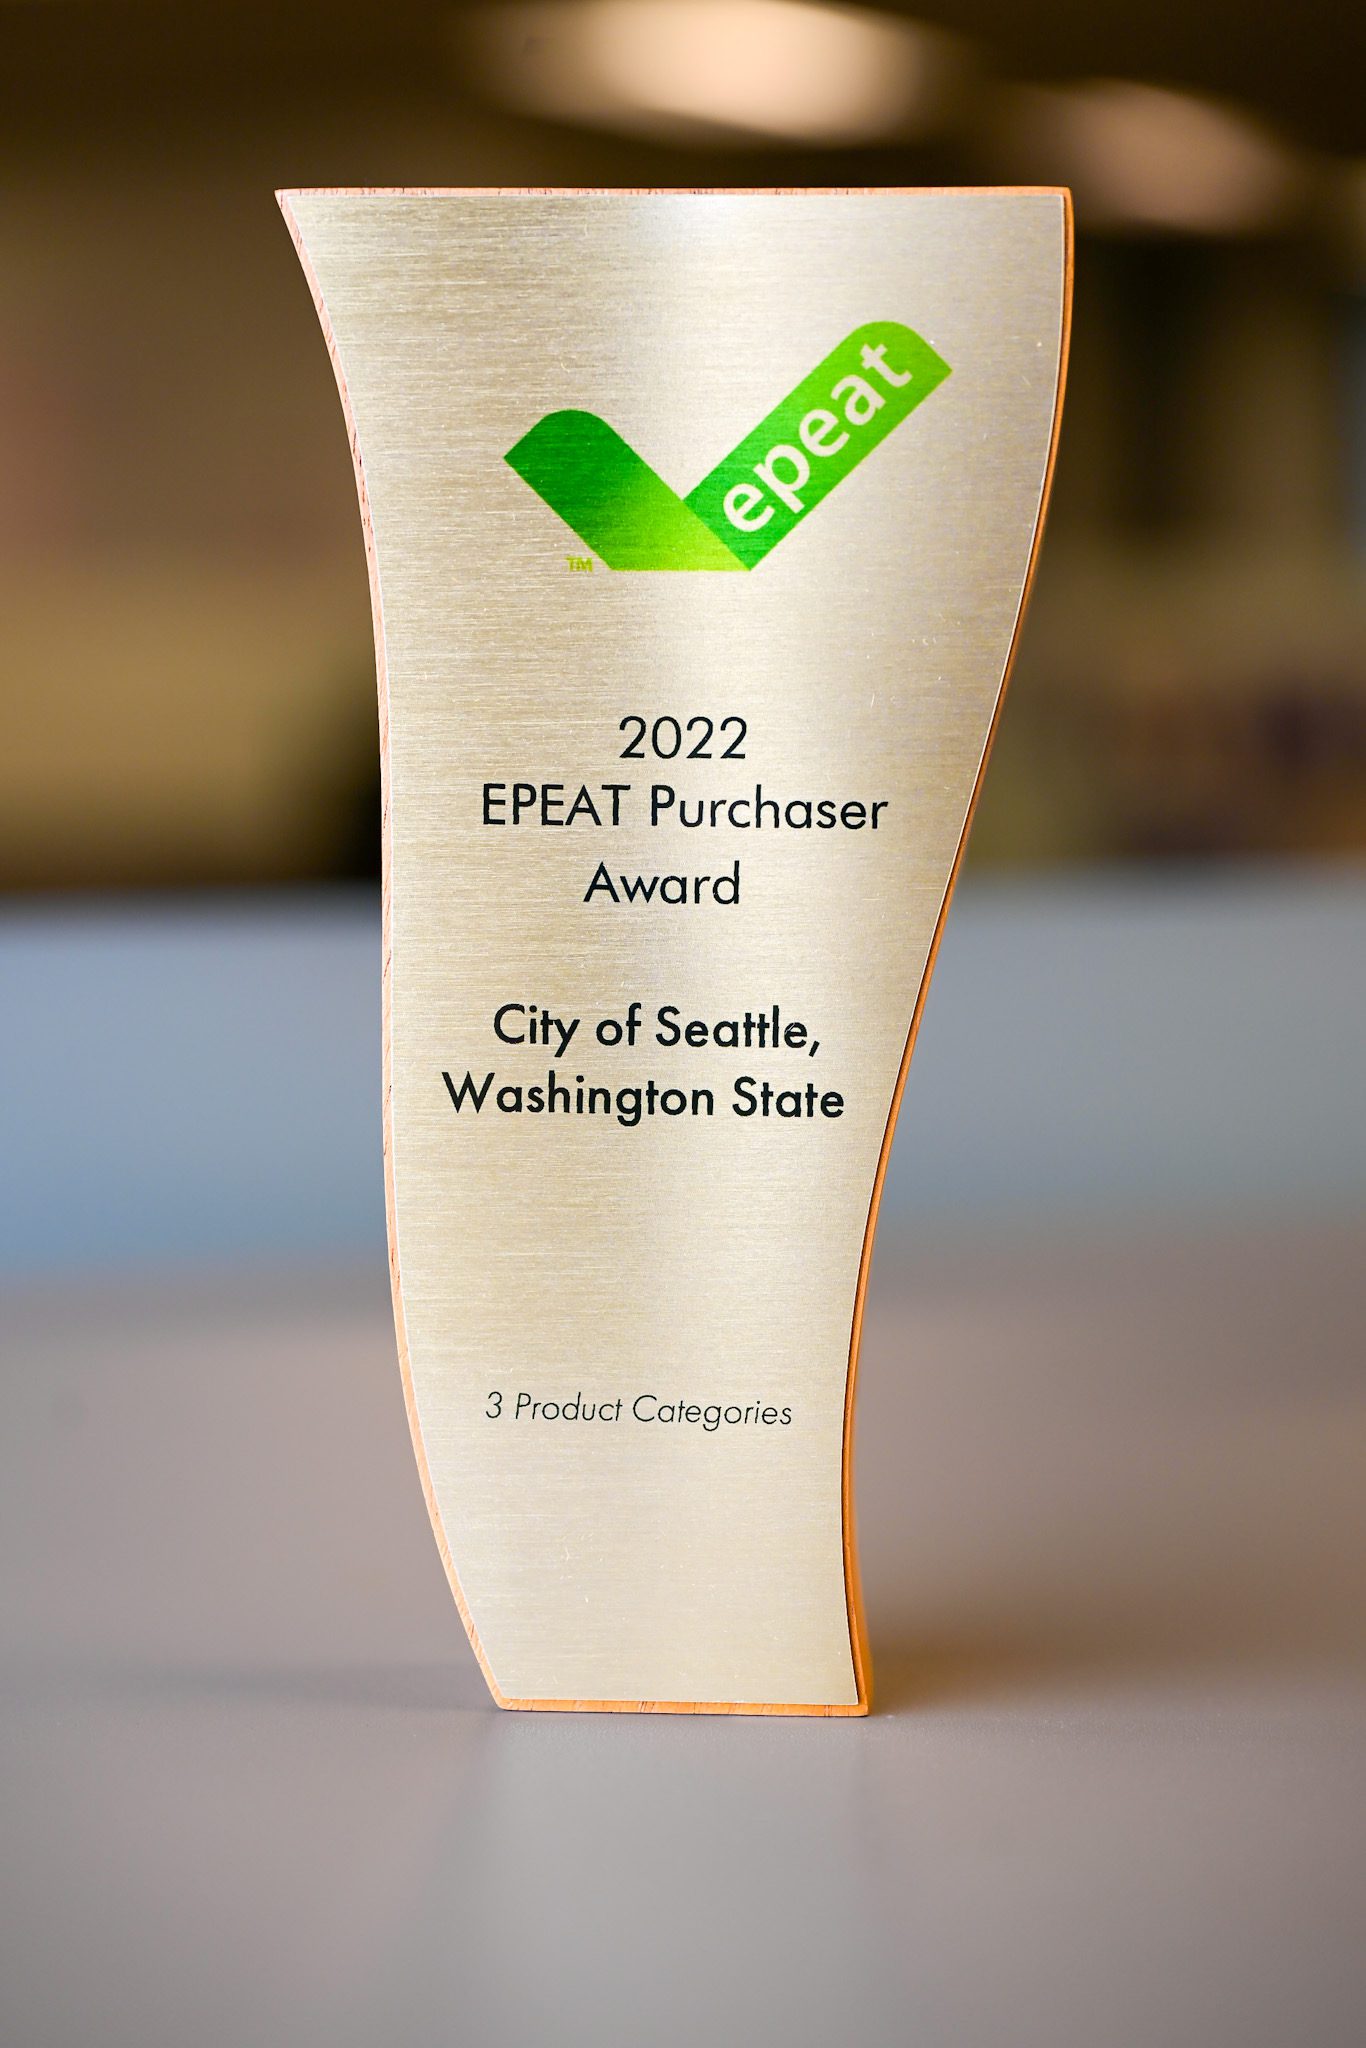 Seattle wins 2022 EPEAT Purchaser Award for sustainable electronics procurement